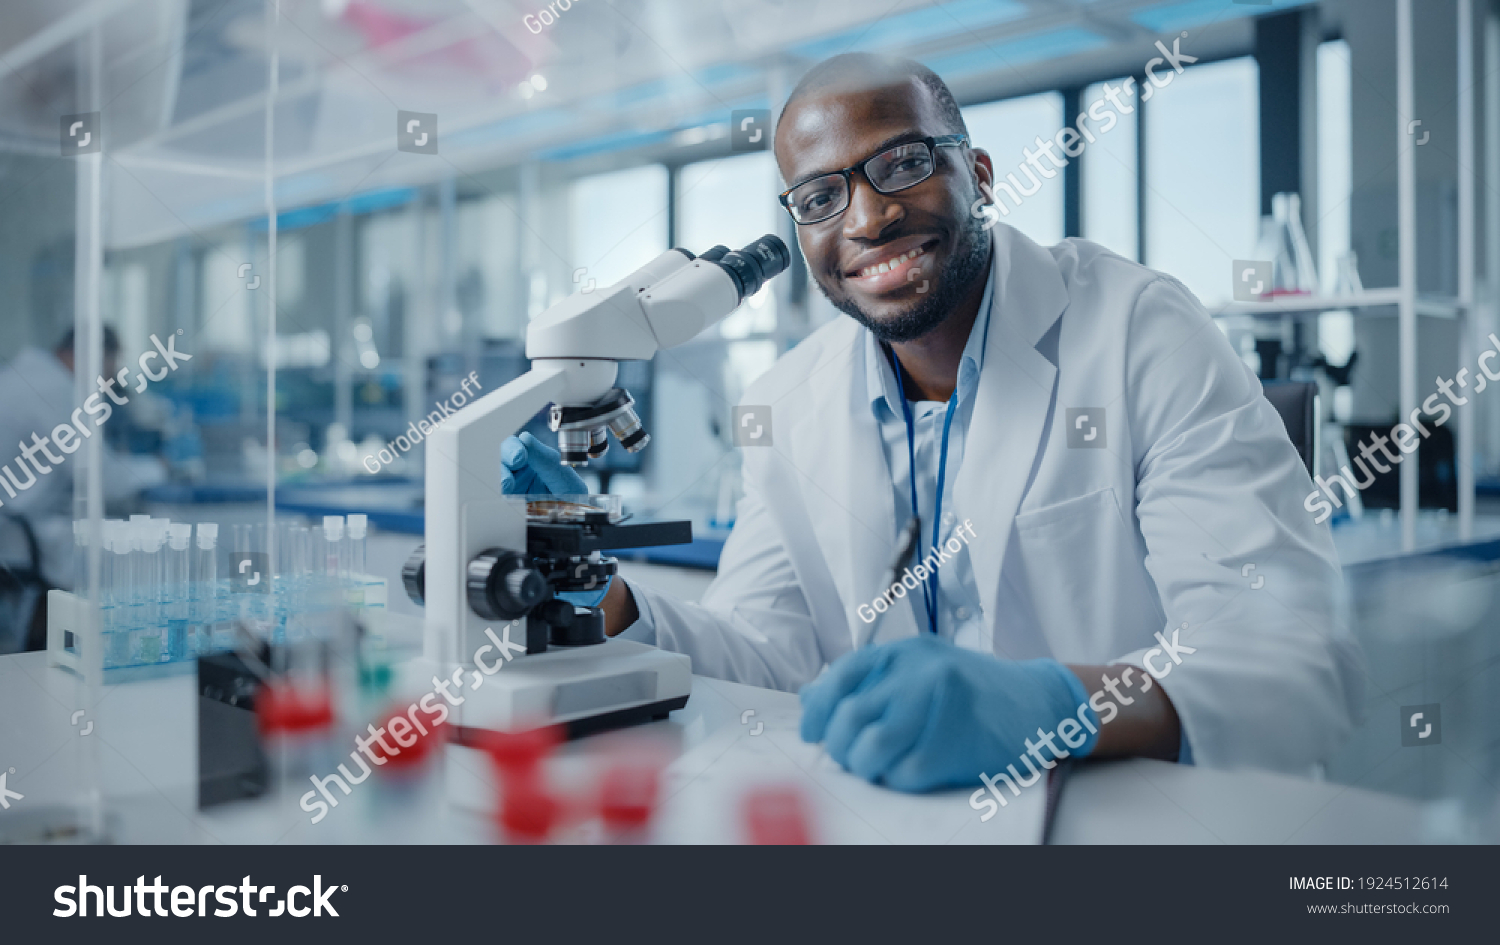 Modern Medical Research Laboratory: Portrait of Male Scientist Using Microscope, Charmingly Smiling on Camera. Advanced Scientific Lab for Medicine, Biotechnology, Microbiology Development #1924512614